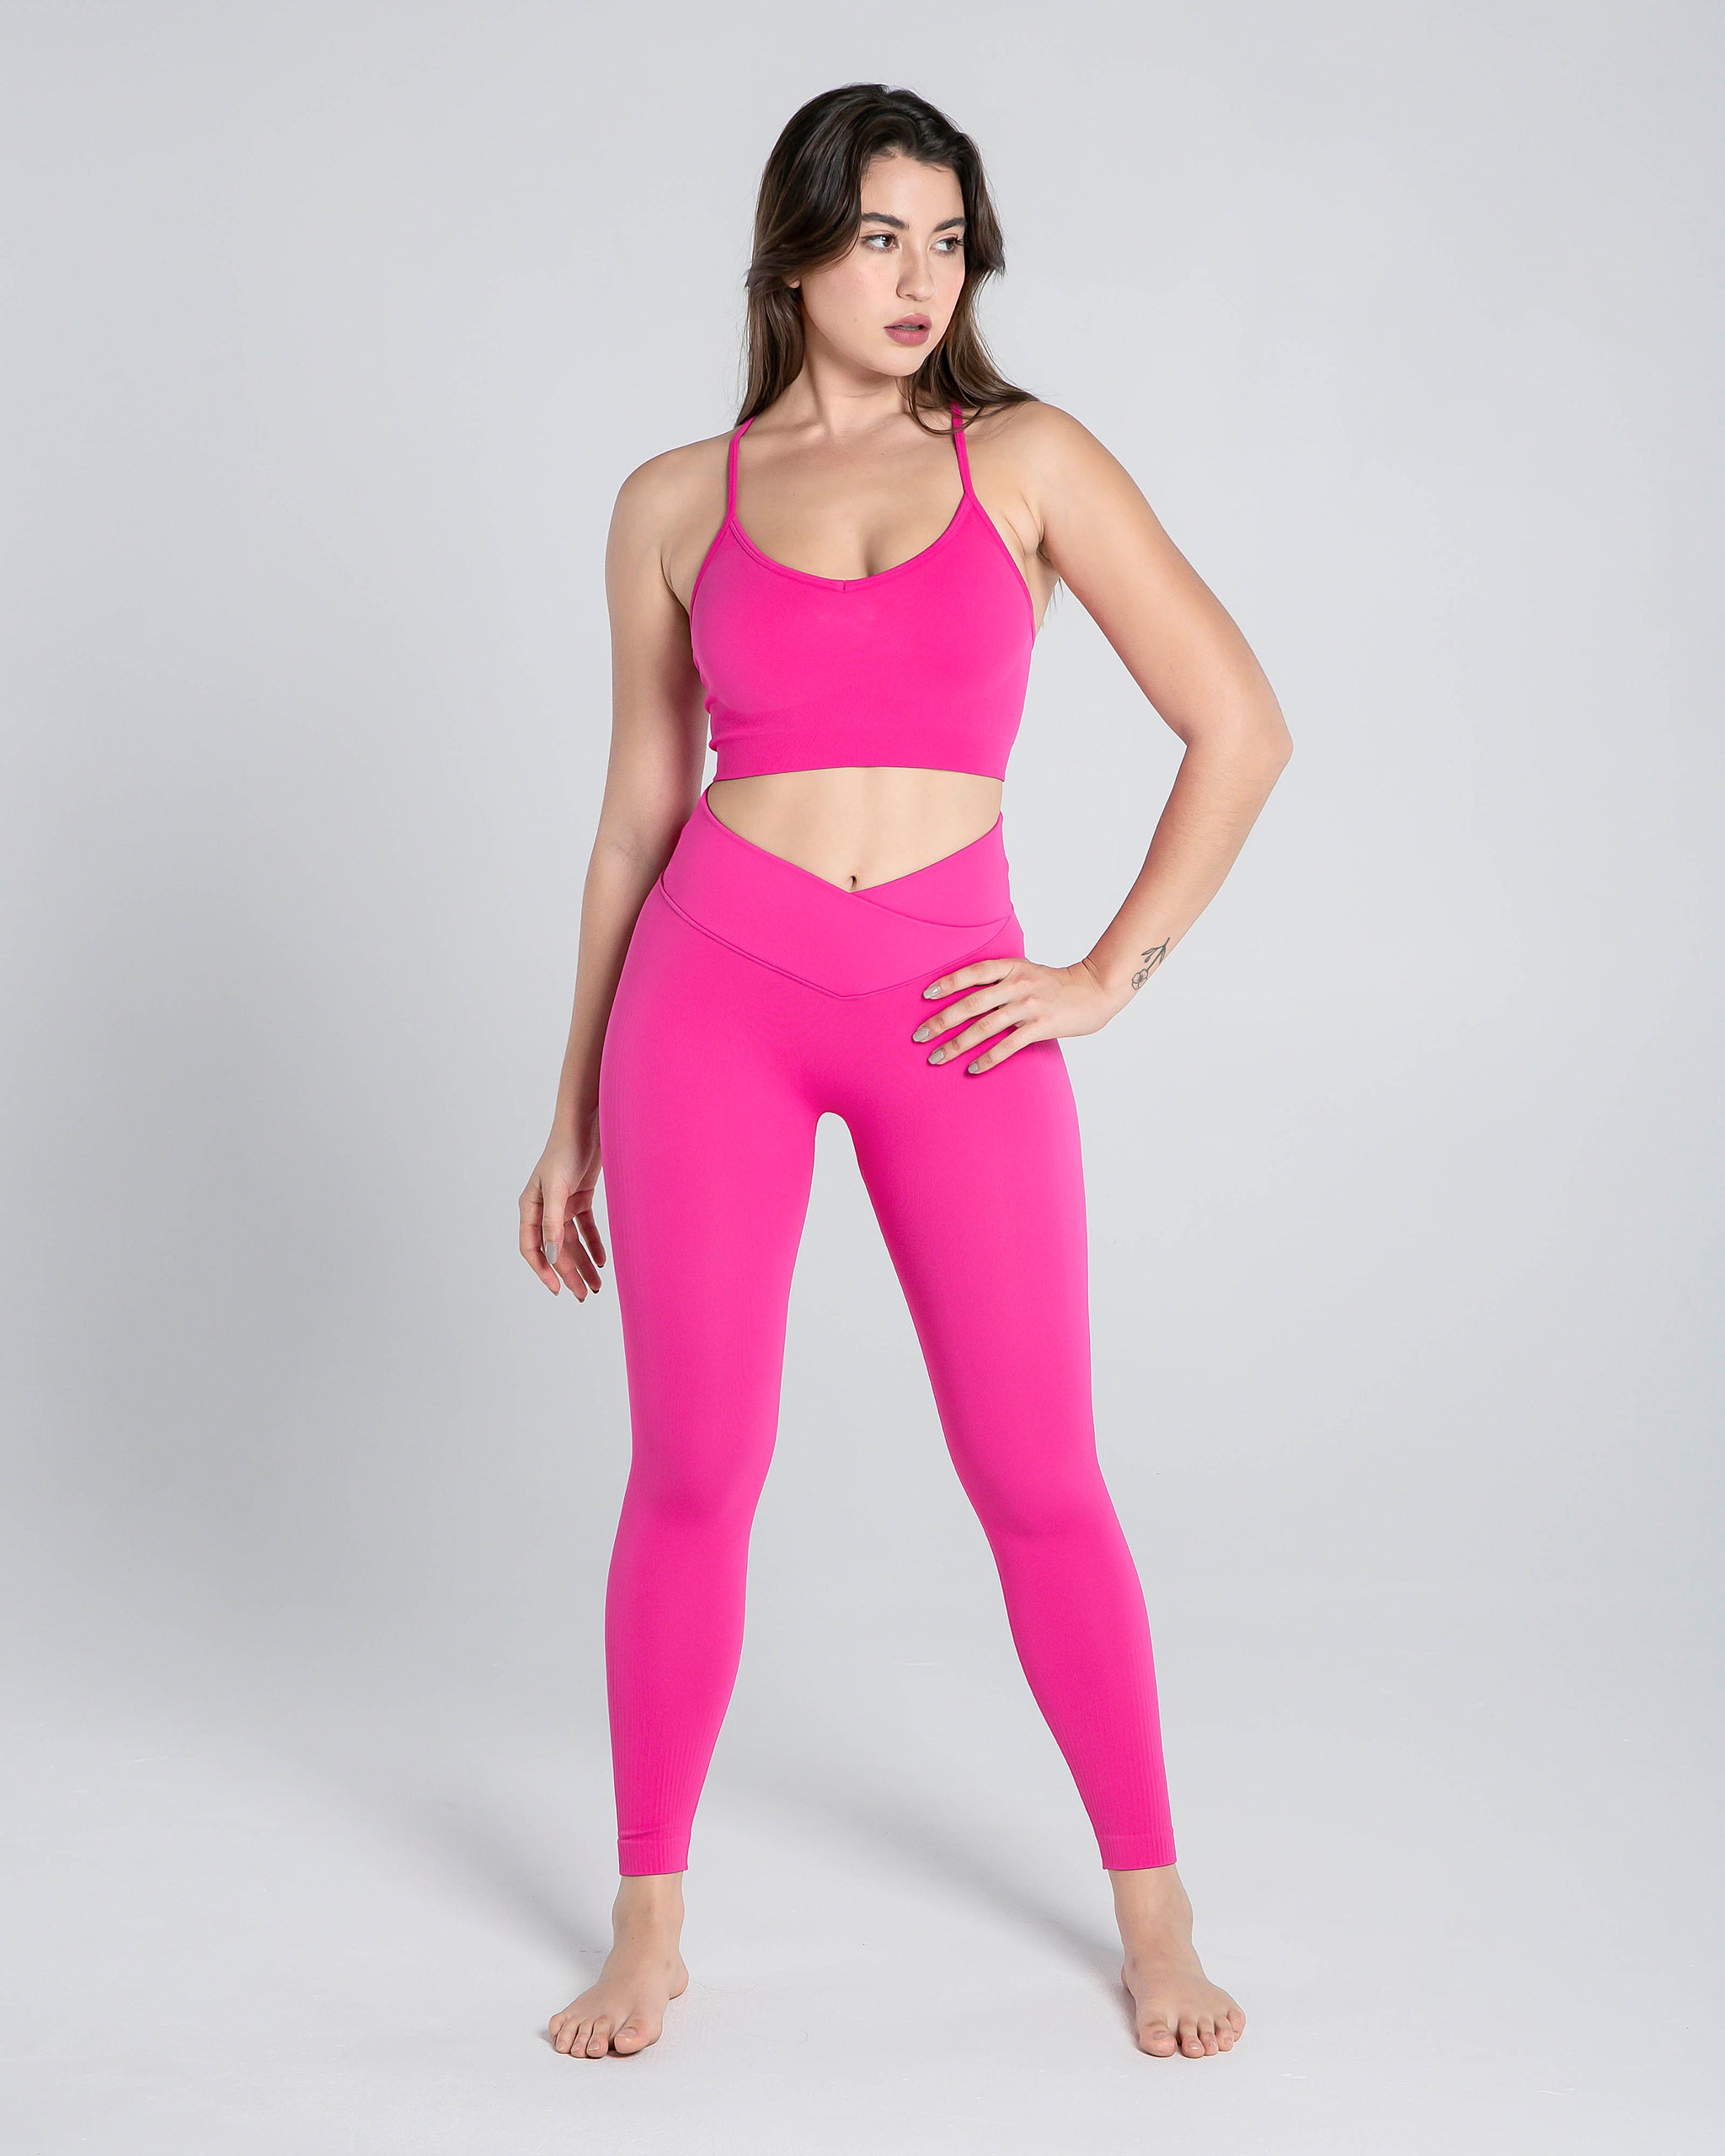 RXRXCOCO Seamless Crossover Leggings High Waisted Rear-Lifting